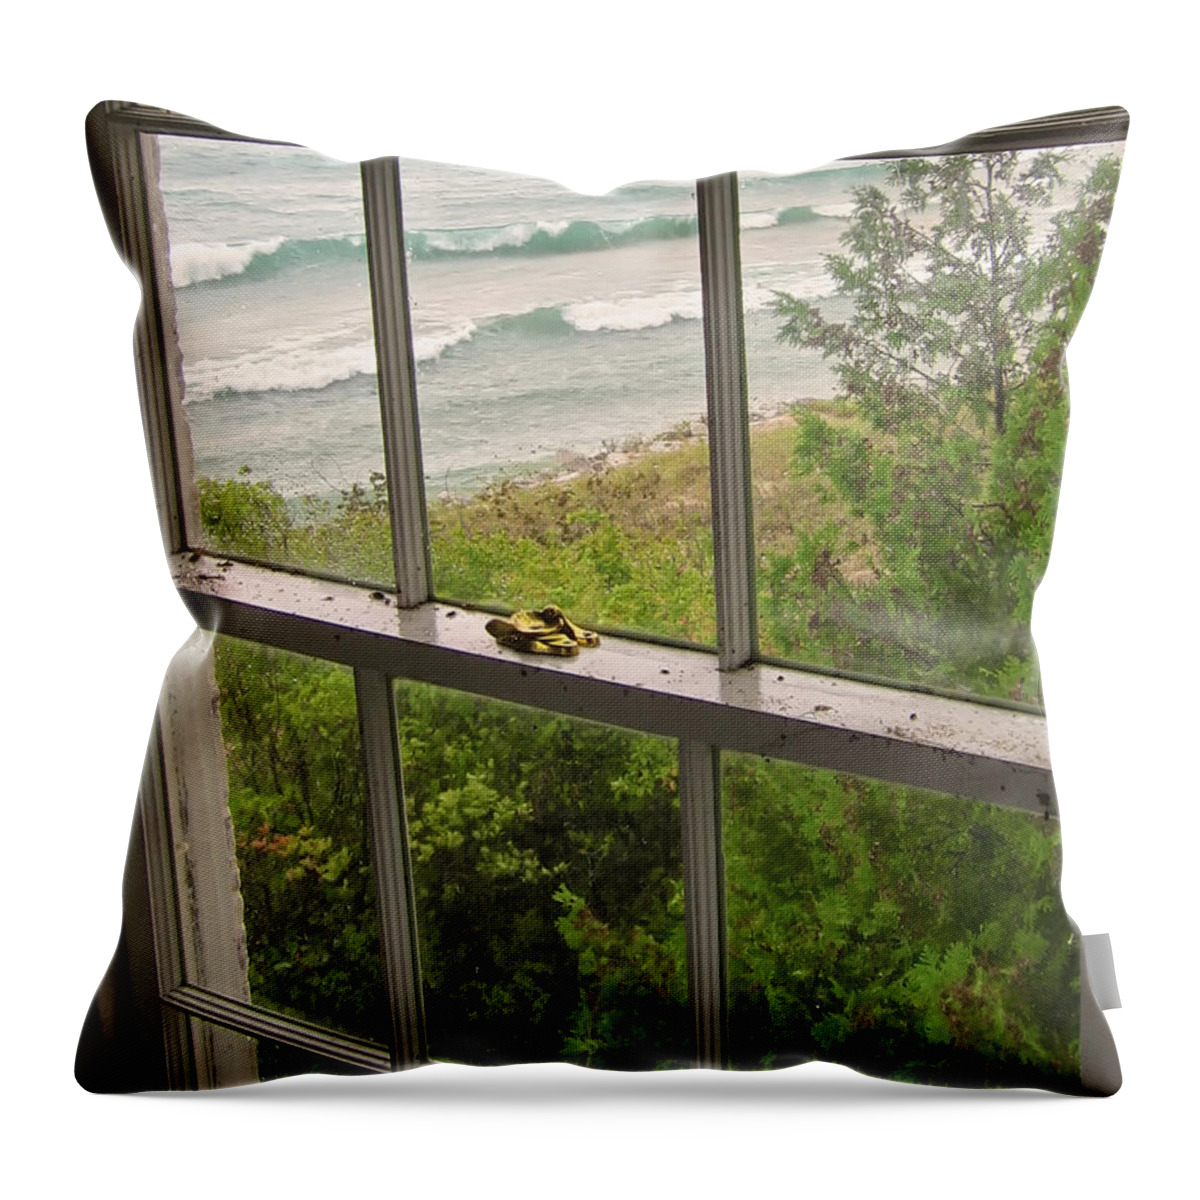 Landscapes Throw Pillow featuring the photograph South Manitou Island Lighthouse Window by Mary Lee Dereske